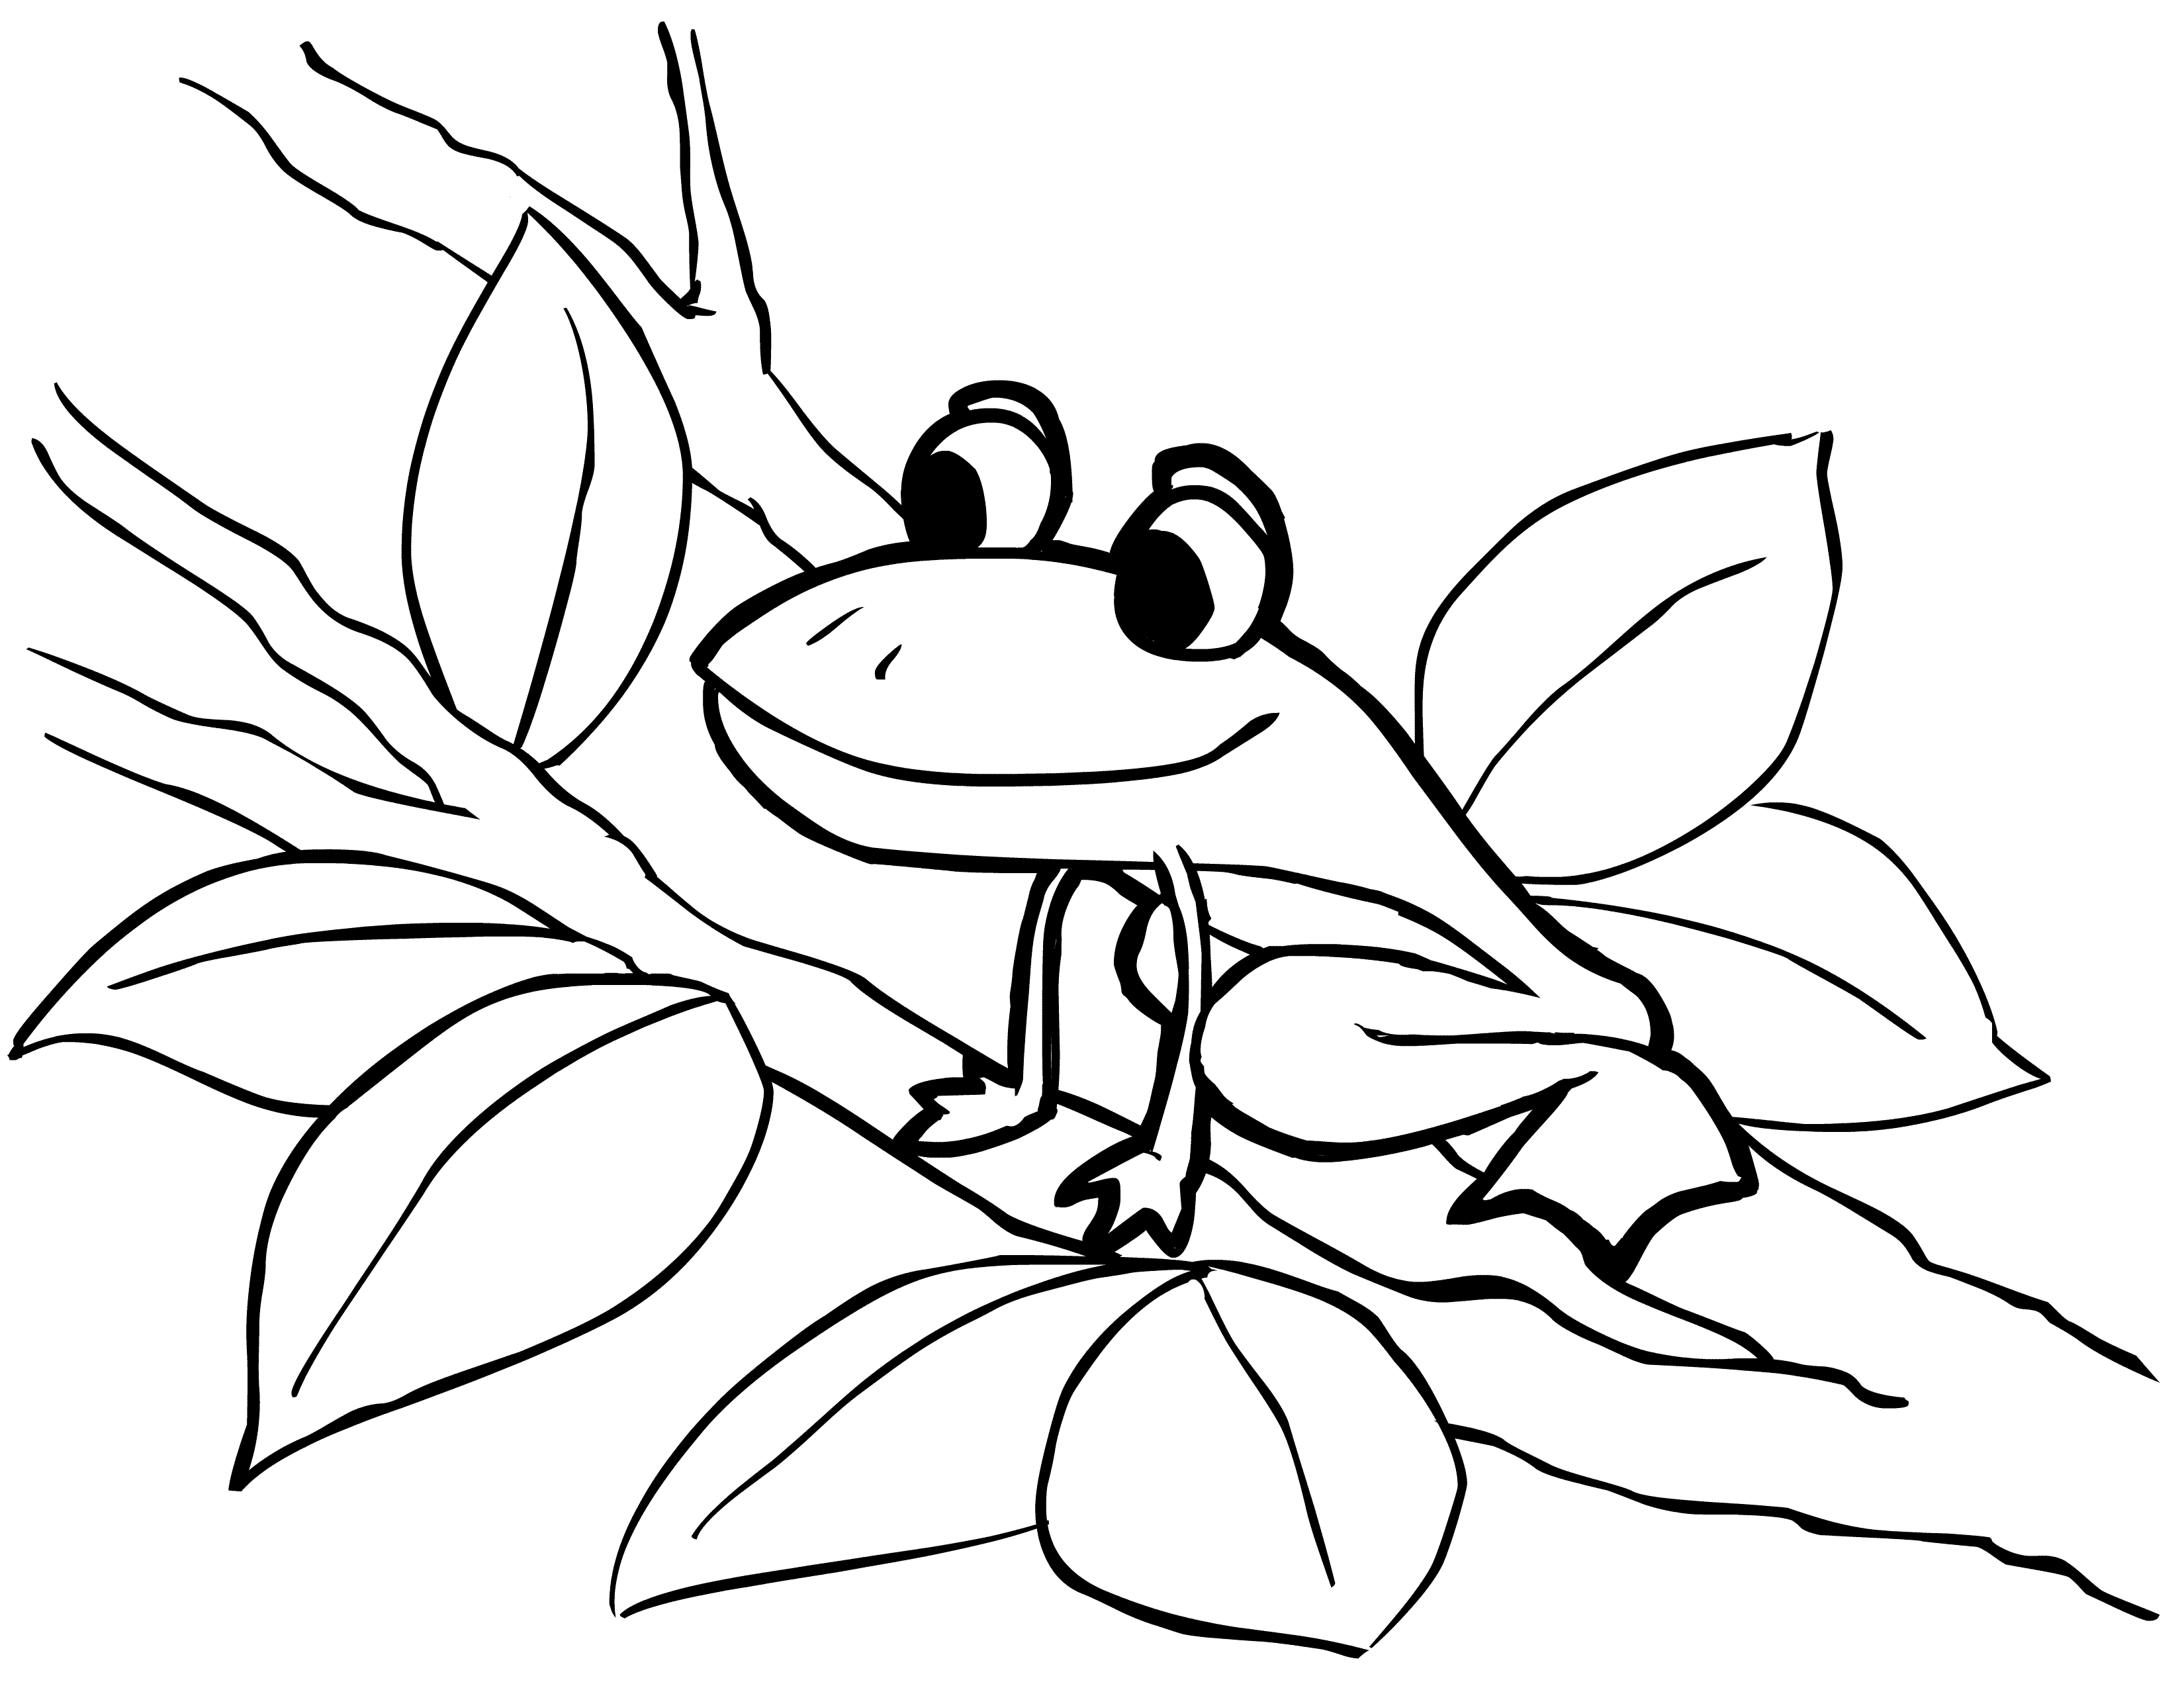 online coloring for toddlers free printable frog coloring pages for kids toddlers for online coloring 